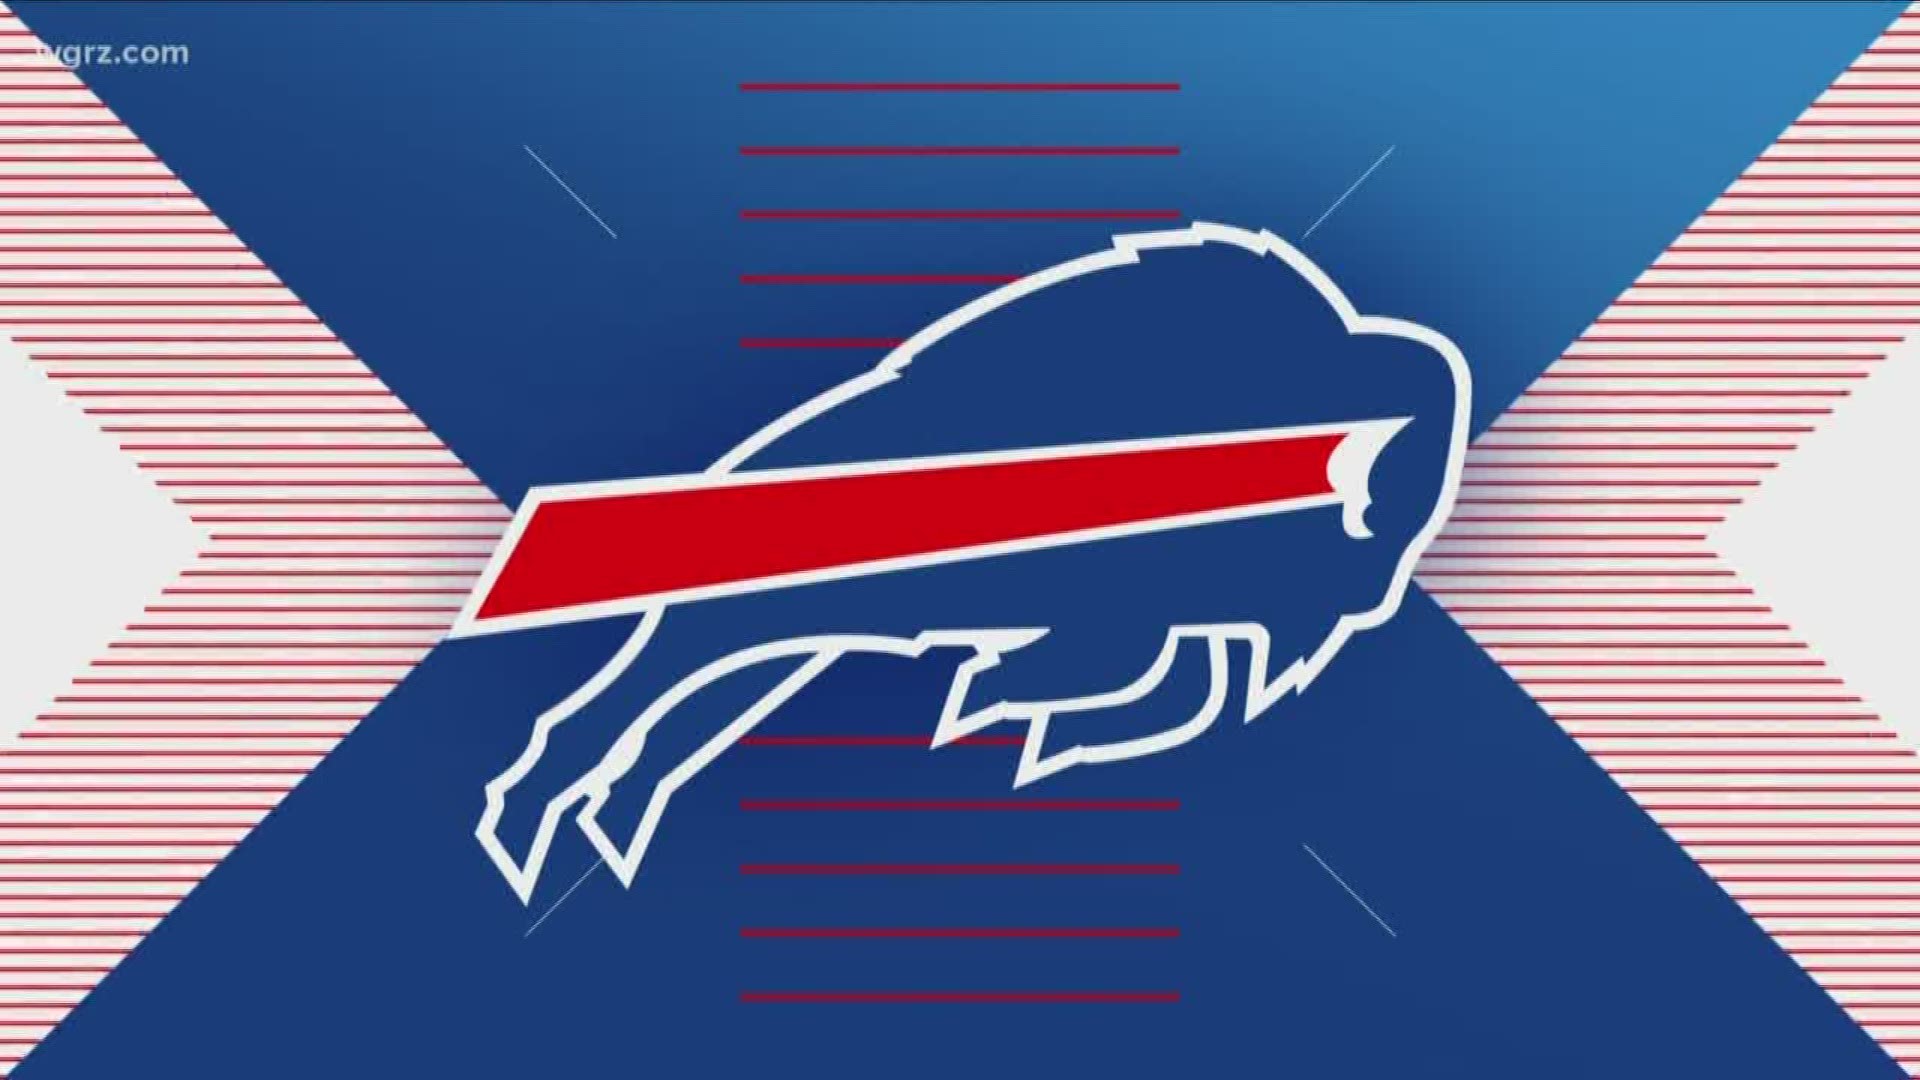 As of now, Buffalo is not yet guaranteed a playoff spot and even if they do make it into the postseason, it's a long shot to play at home.